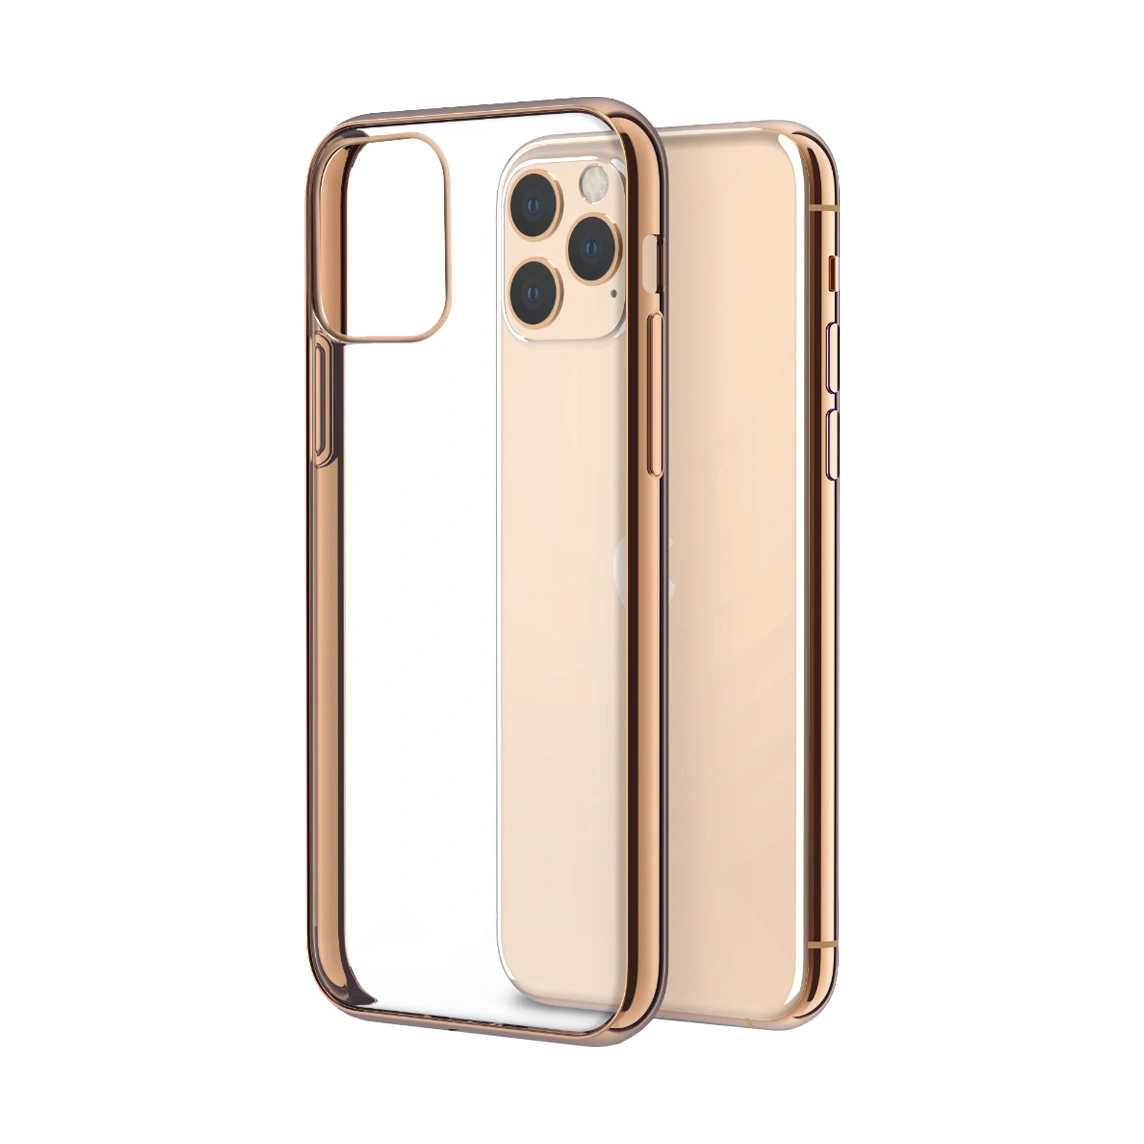 KSTDESIGN Clear Gold Case For iPhone 11 Pro